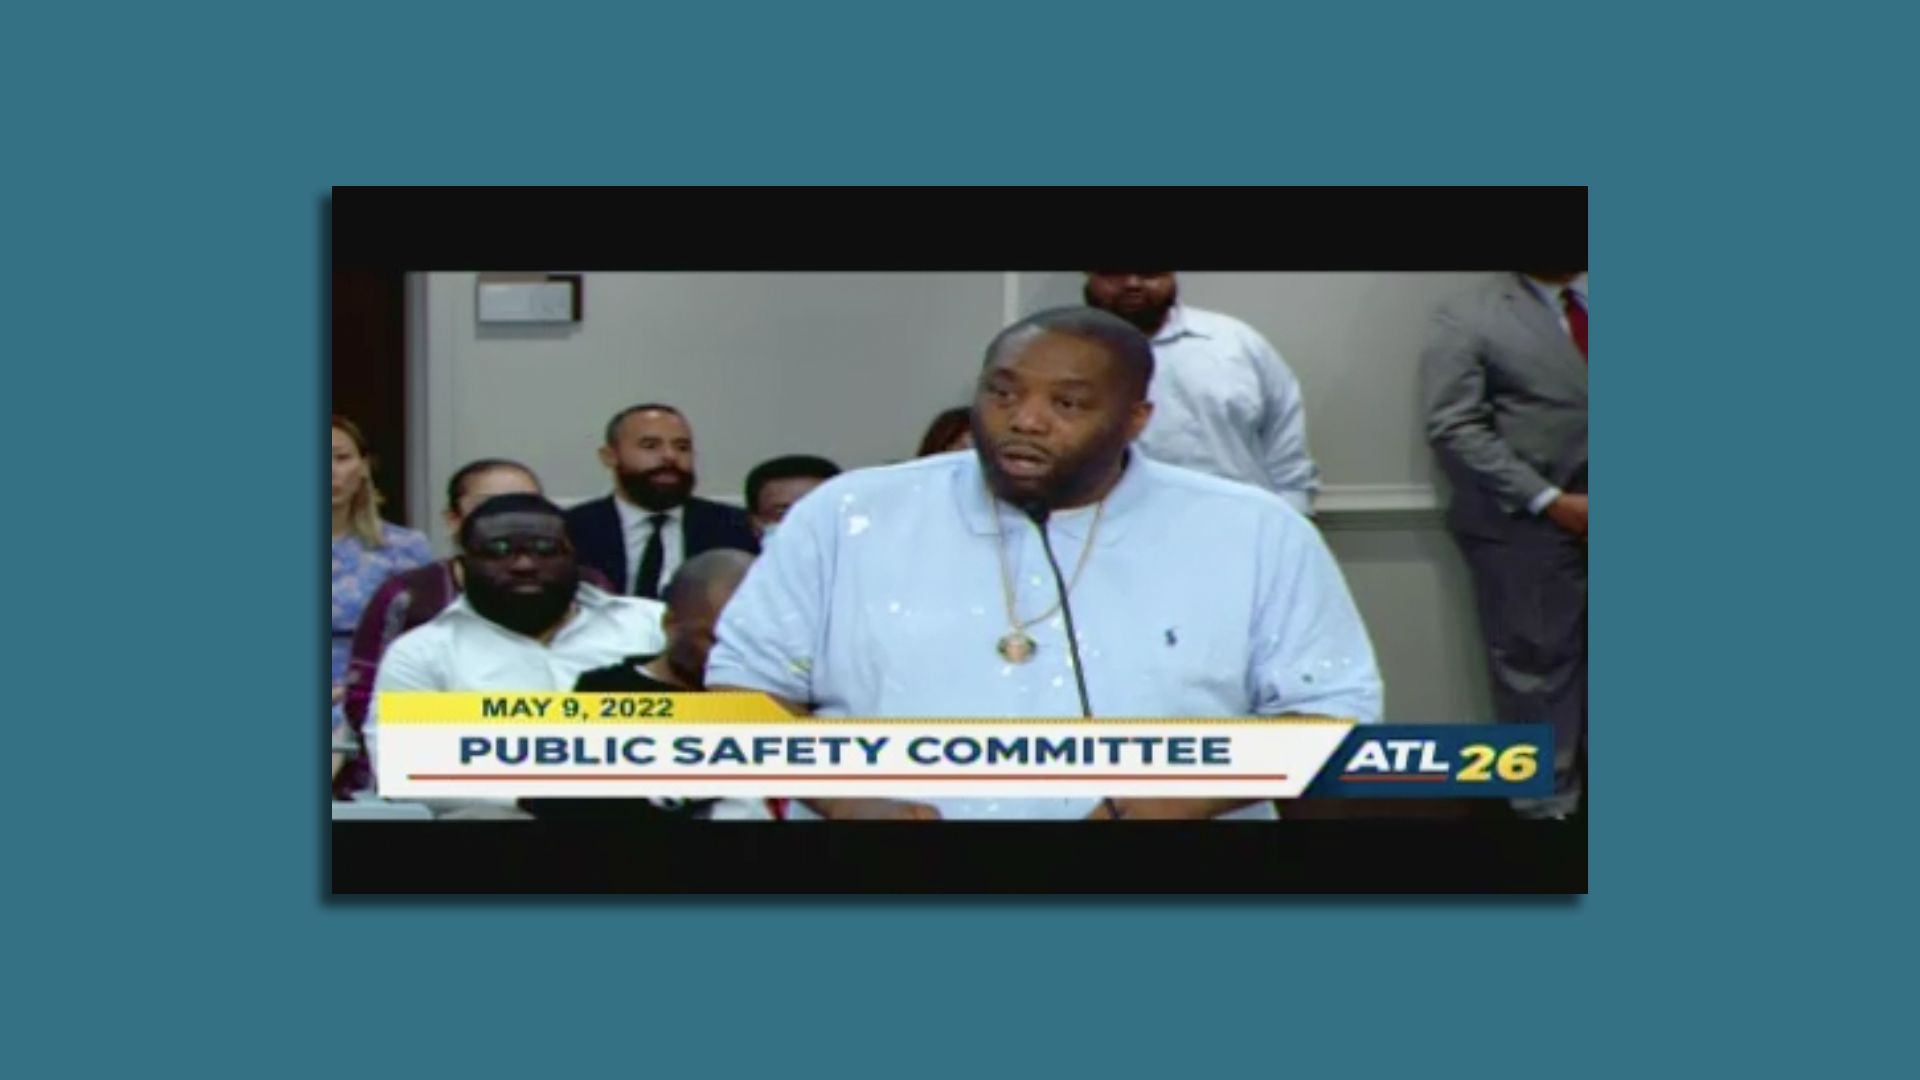 Michael Render, an Atlanta rapper and business man better known as Killer Mike, speaks at an Atlanta City Council meeting